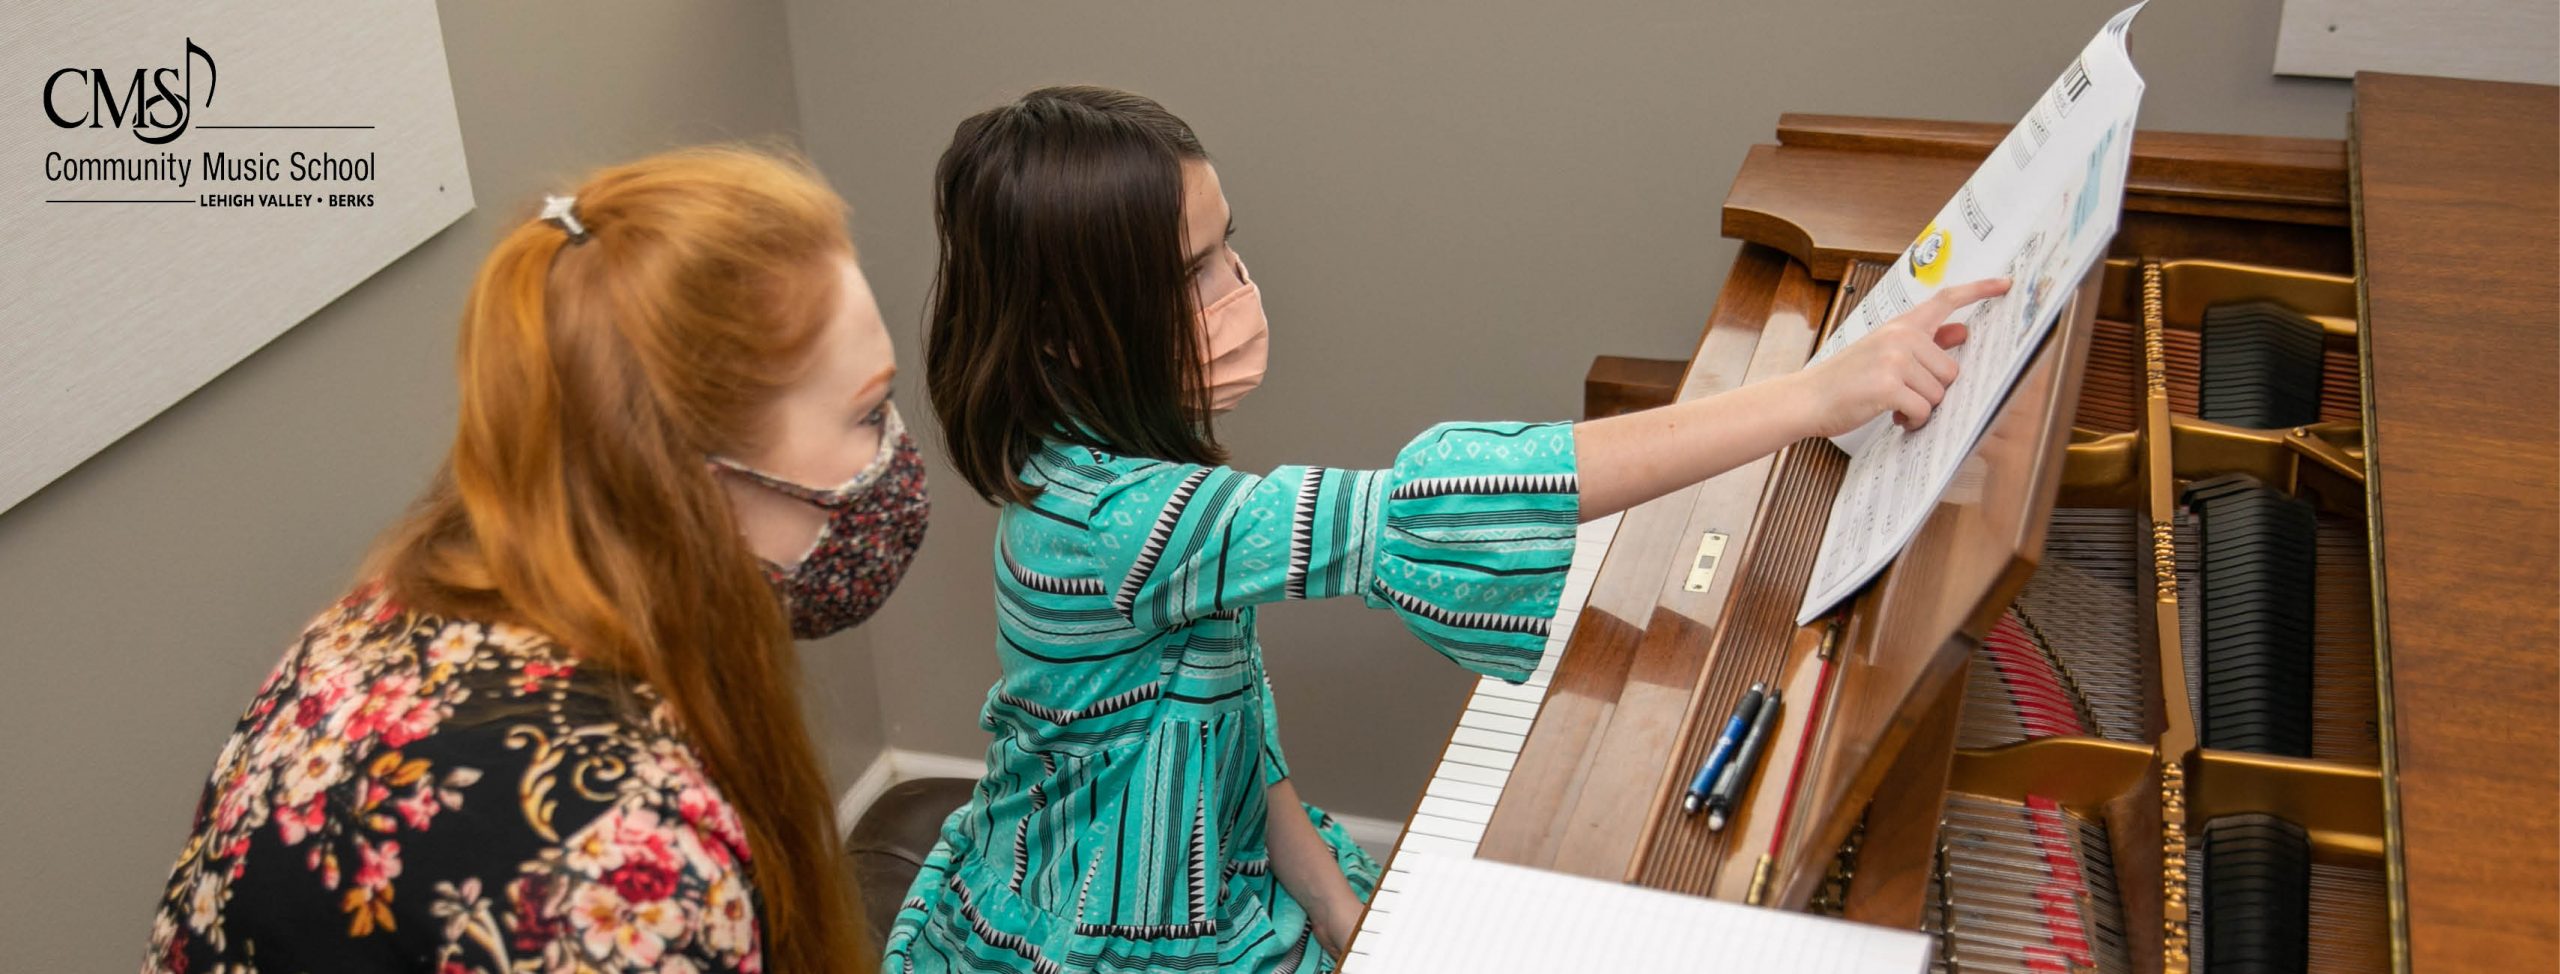 Dr. Annie Tindall-Gibson gives a piano lesson to a young girl at Community Music School.